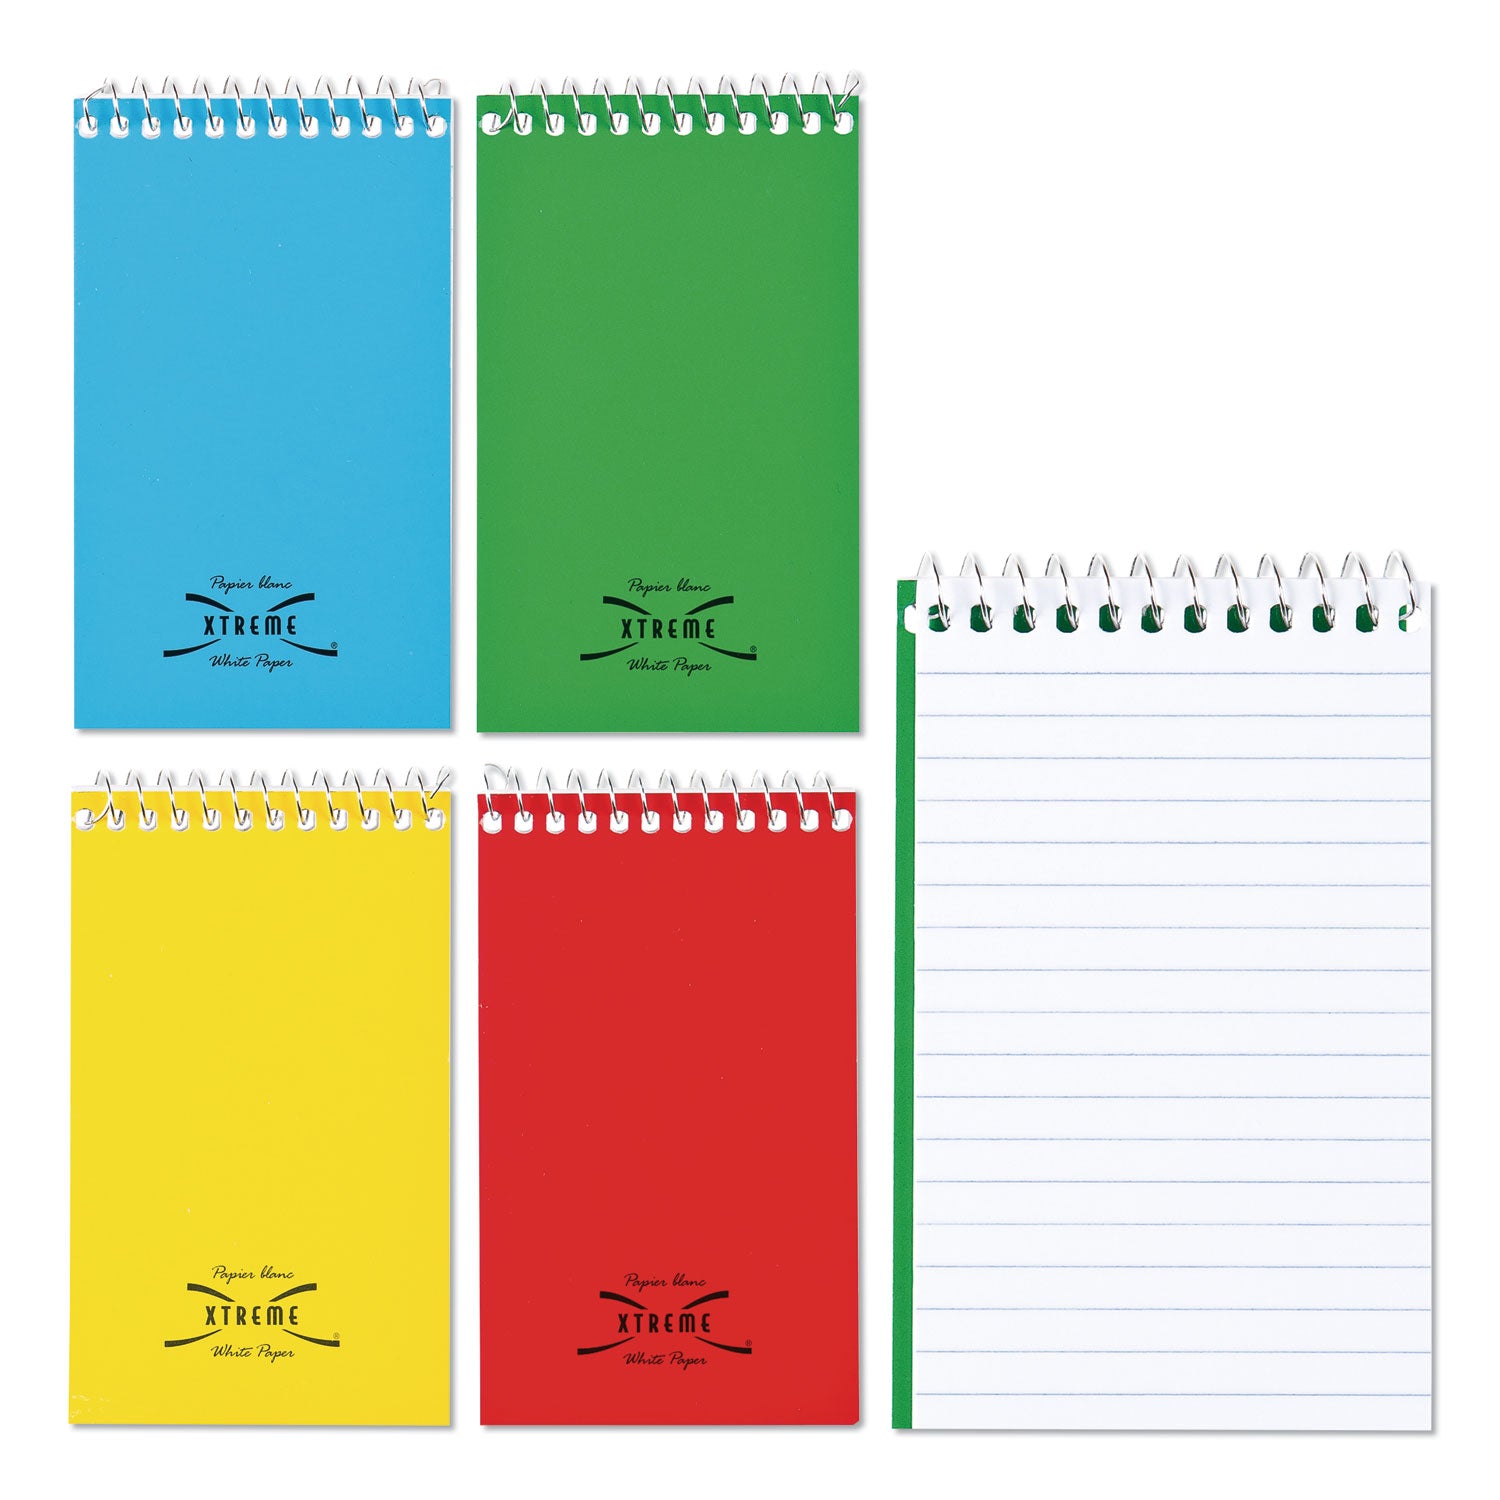 Paper Blanc Xtreme White Wirebound Memo Pads, Narrow Rule, Randomly Assorted Cover Colors, 60 White 3 x 5 Sheets - 